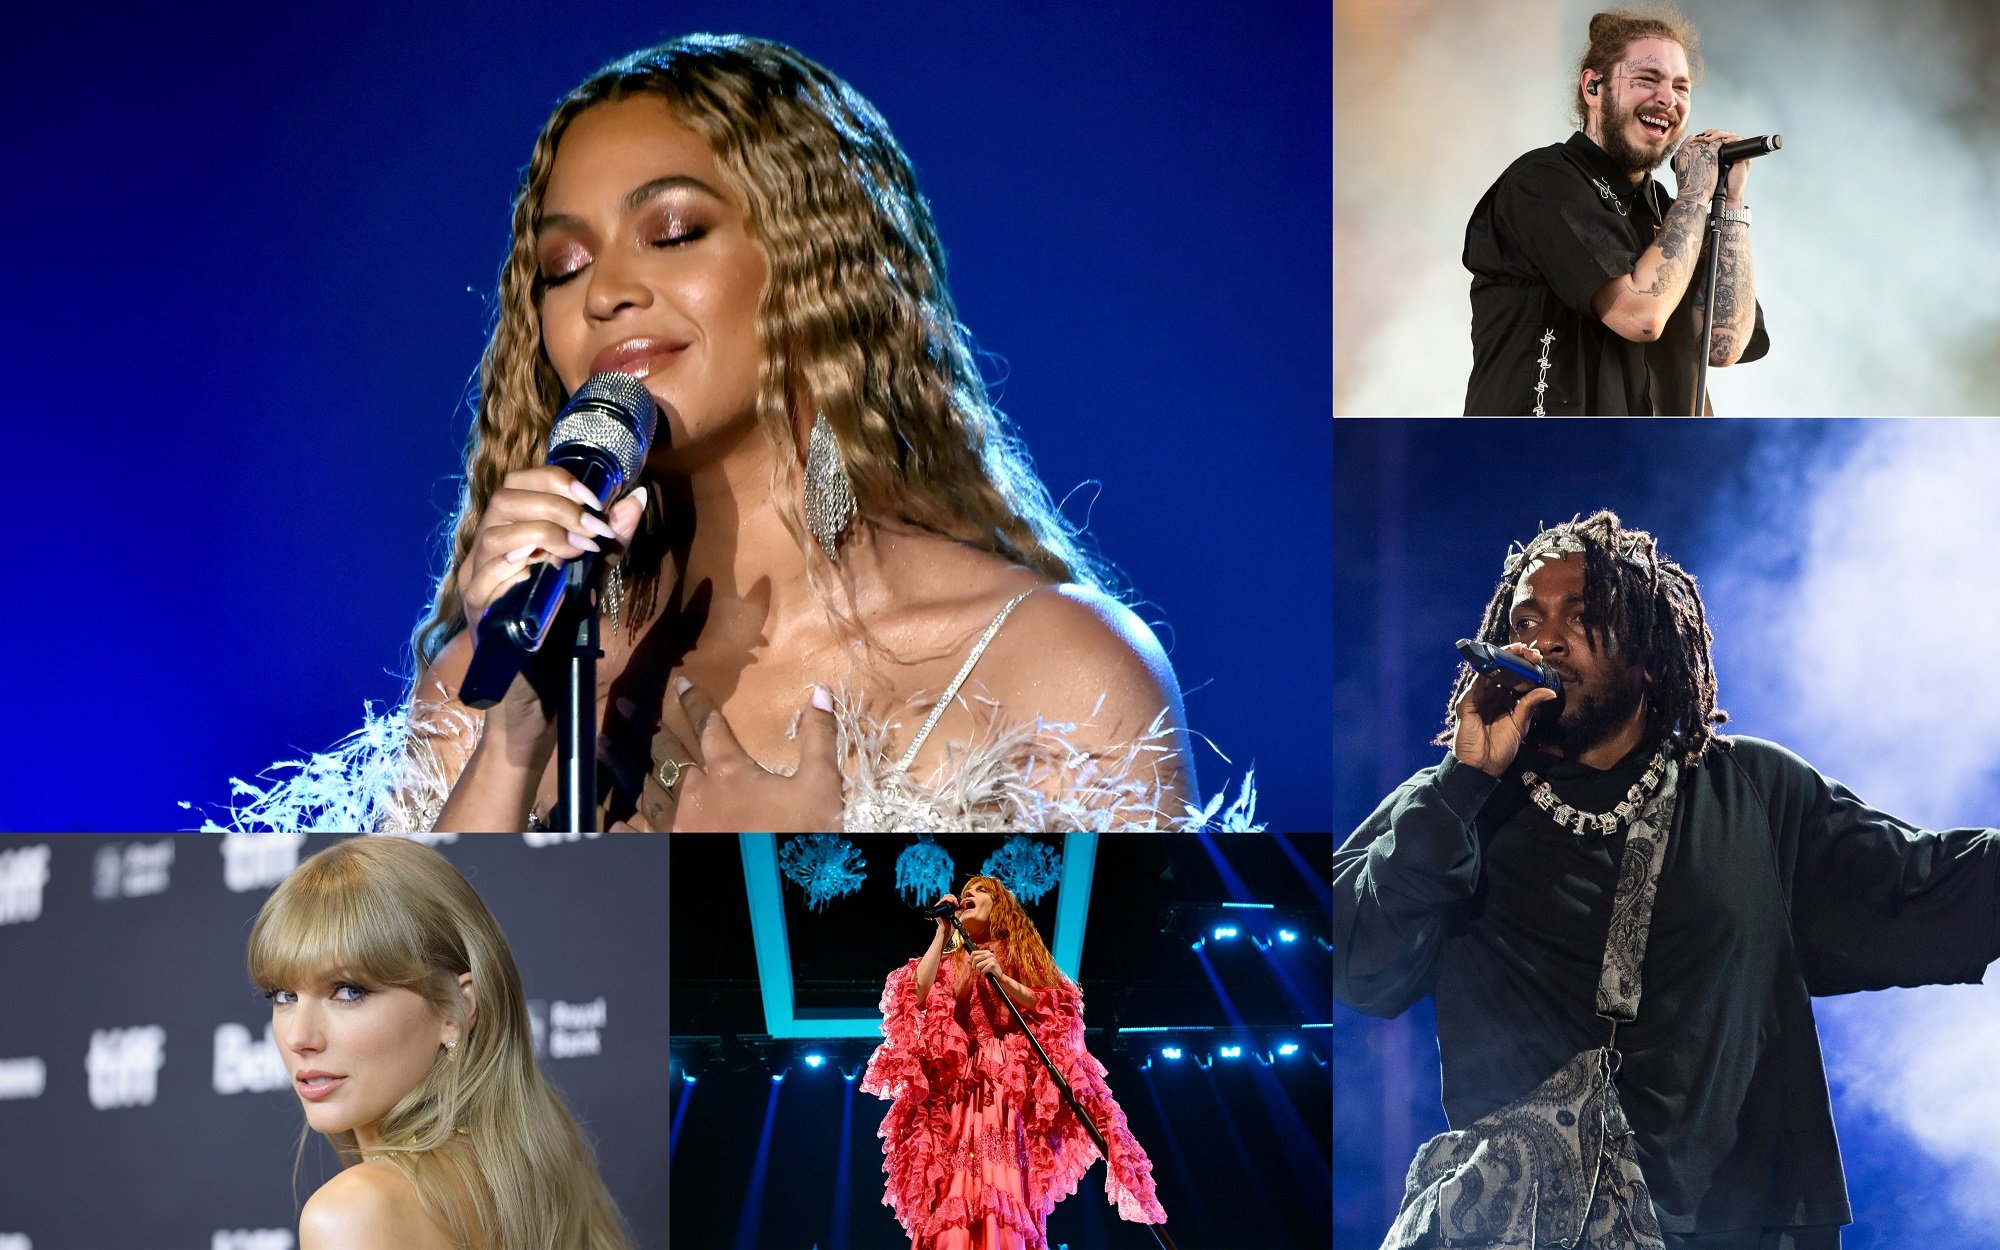 A joined photo of Beyoncé, Taylor Swift, Florence + the Machine, Kendrick Lamar, and Post Malone for Showbiz Cheat Sheet's Best Songs of 2022 nominees